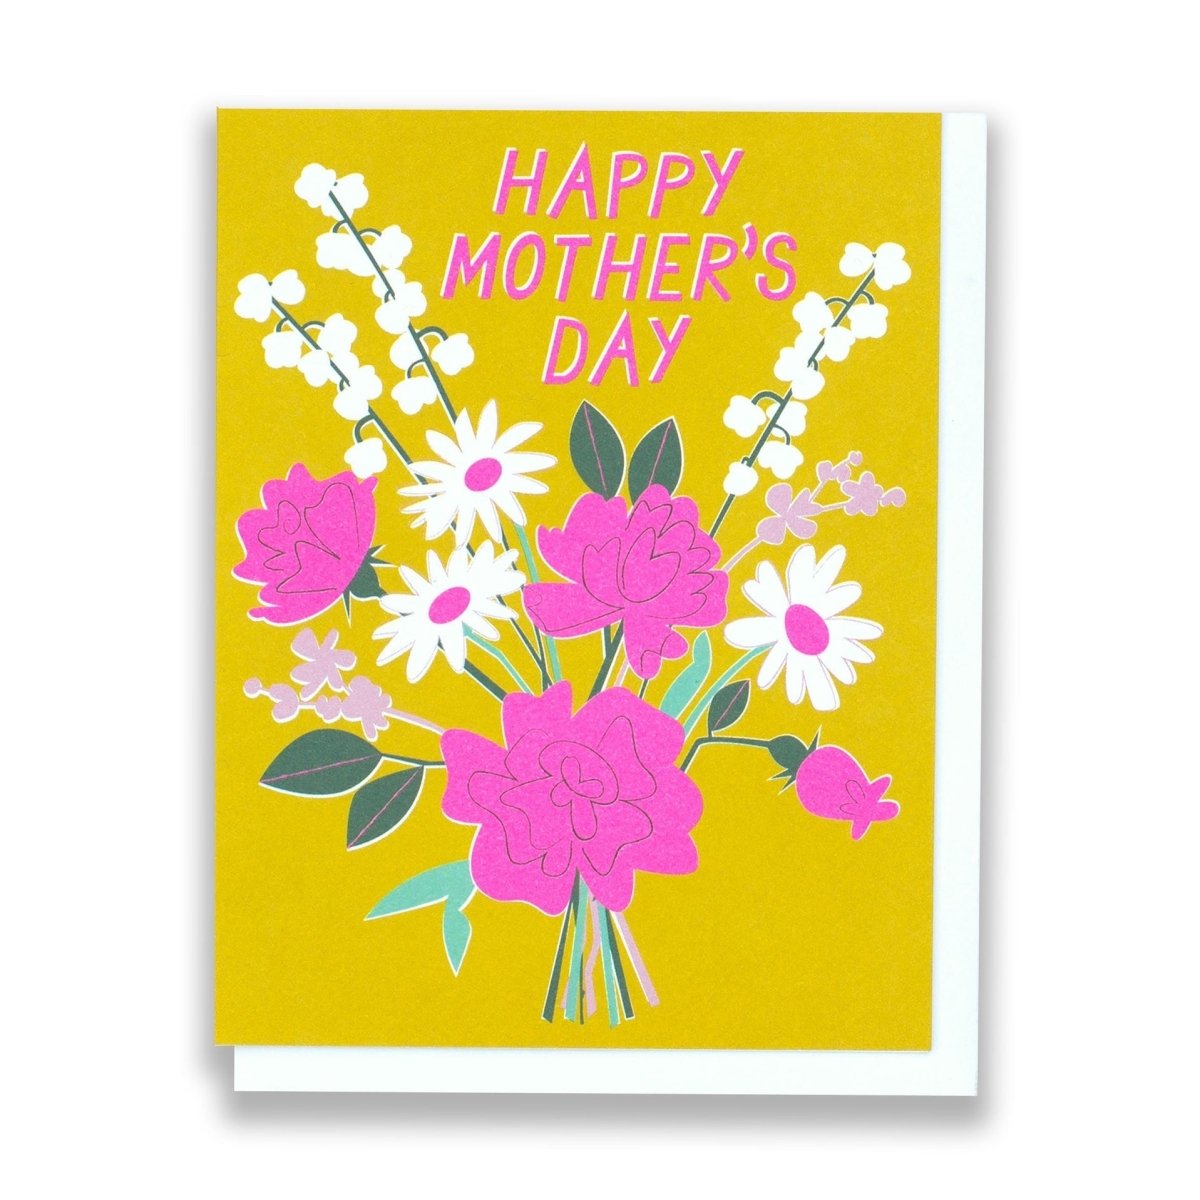 Front of card reads: "HAPPY MOTHER'S DAY." A bight mustard yellow card with a bouquet of pink white and green flowers. Made with recycled paper by Banquet Atelier in Vancouver, British Columbia, Canada.